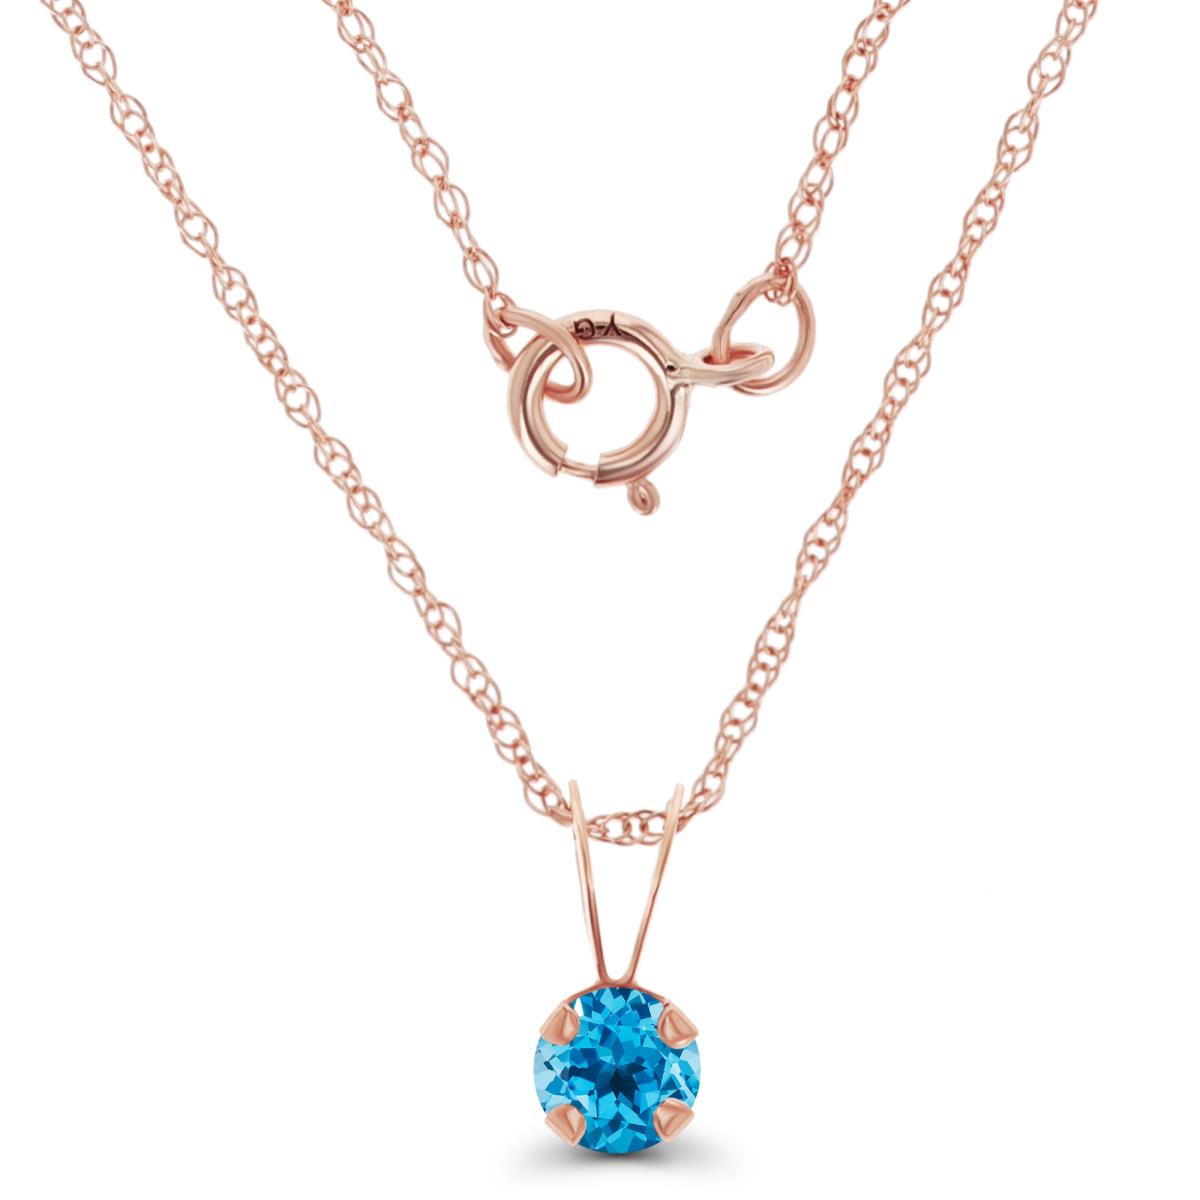 14K Rose Gold 4mm Round Swiss Blue Topaz 18" Rope Chain Necklace